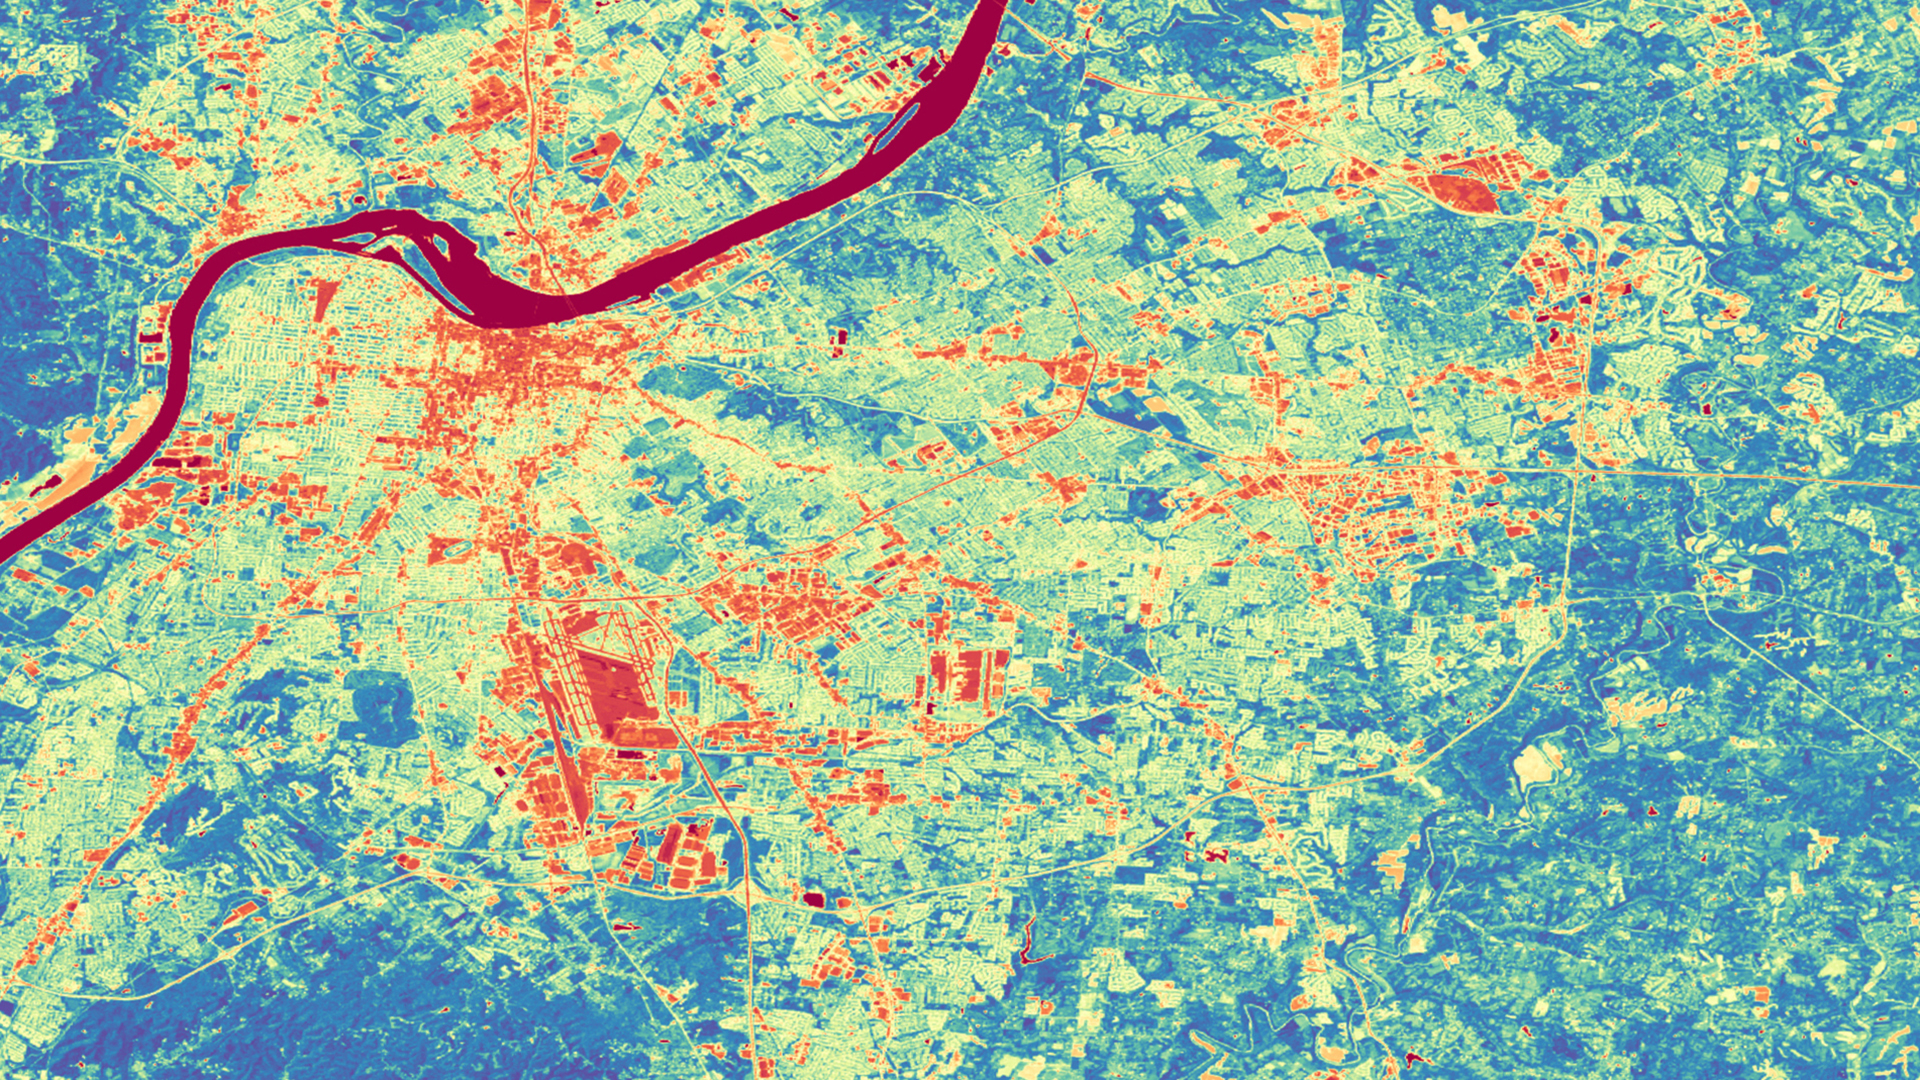 NDVI-processed imagery using 2019 Landsat 8 OLI data for the city of Louisville, Kentucky. Blue indicates high positive NDVI values, red indicates low negative values, and yellow indicates values close to 0. Areas with NDVI values close to and below 0 tend to have little vegetation which may be high priority areas for greening initiatives.  Keywords: Greenness, NDVI